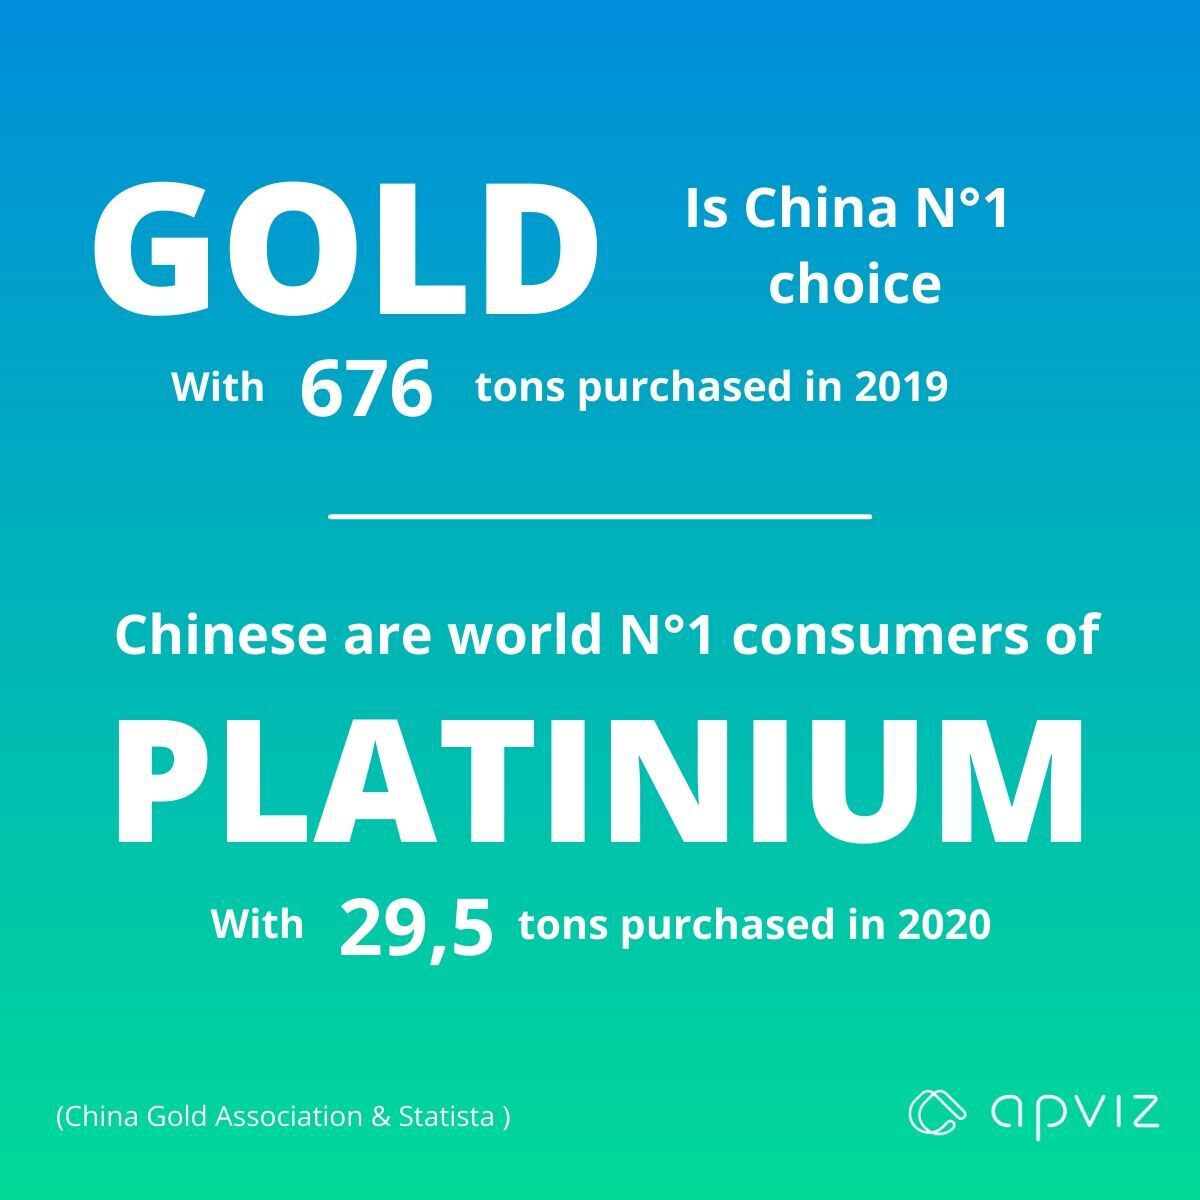 Gold jewellery is trending among China's Gen Z